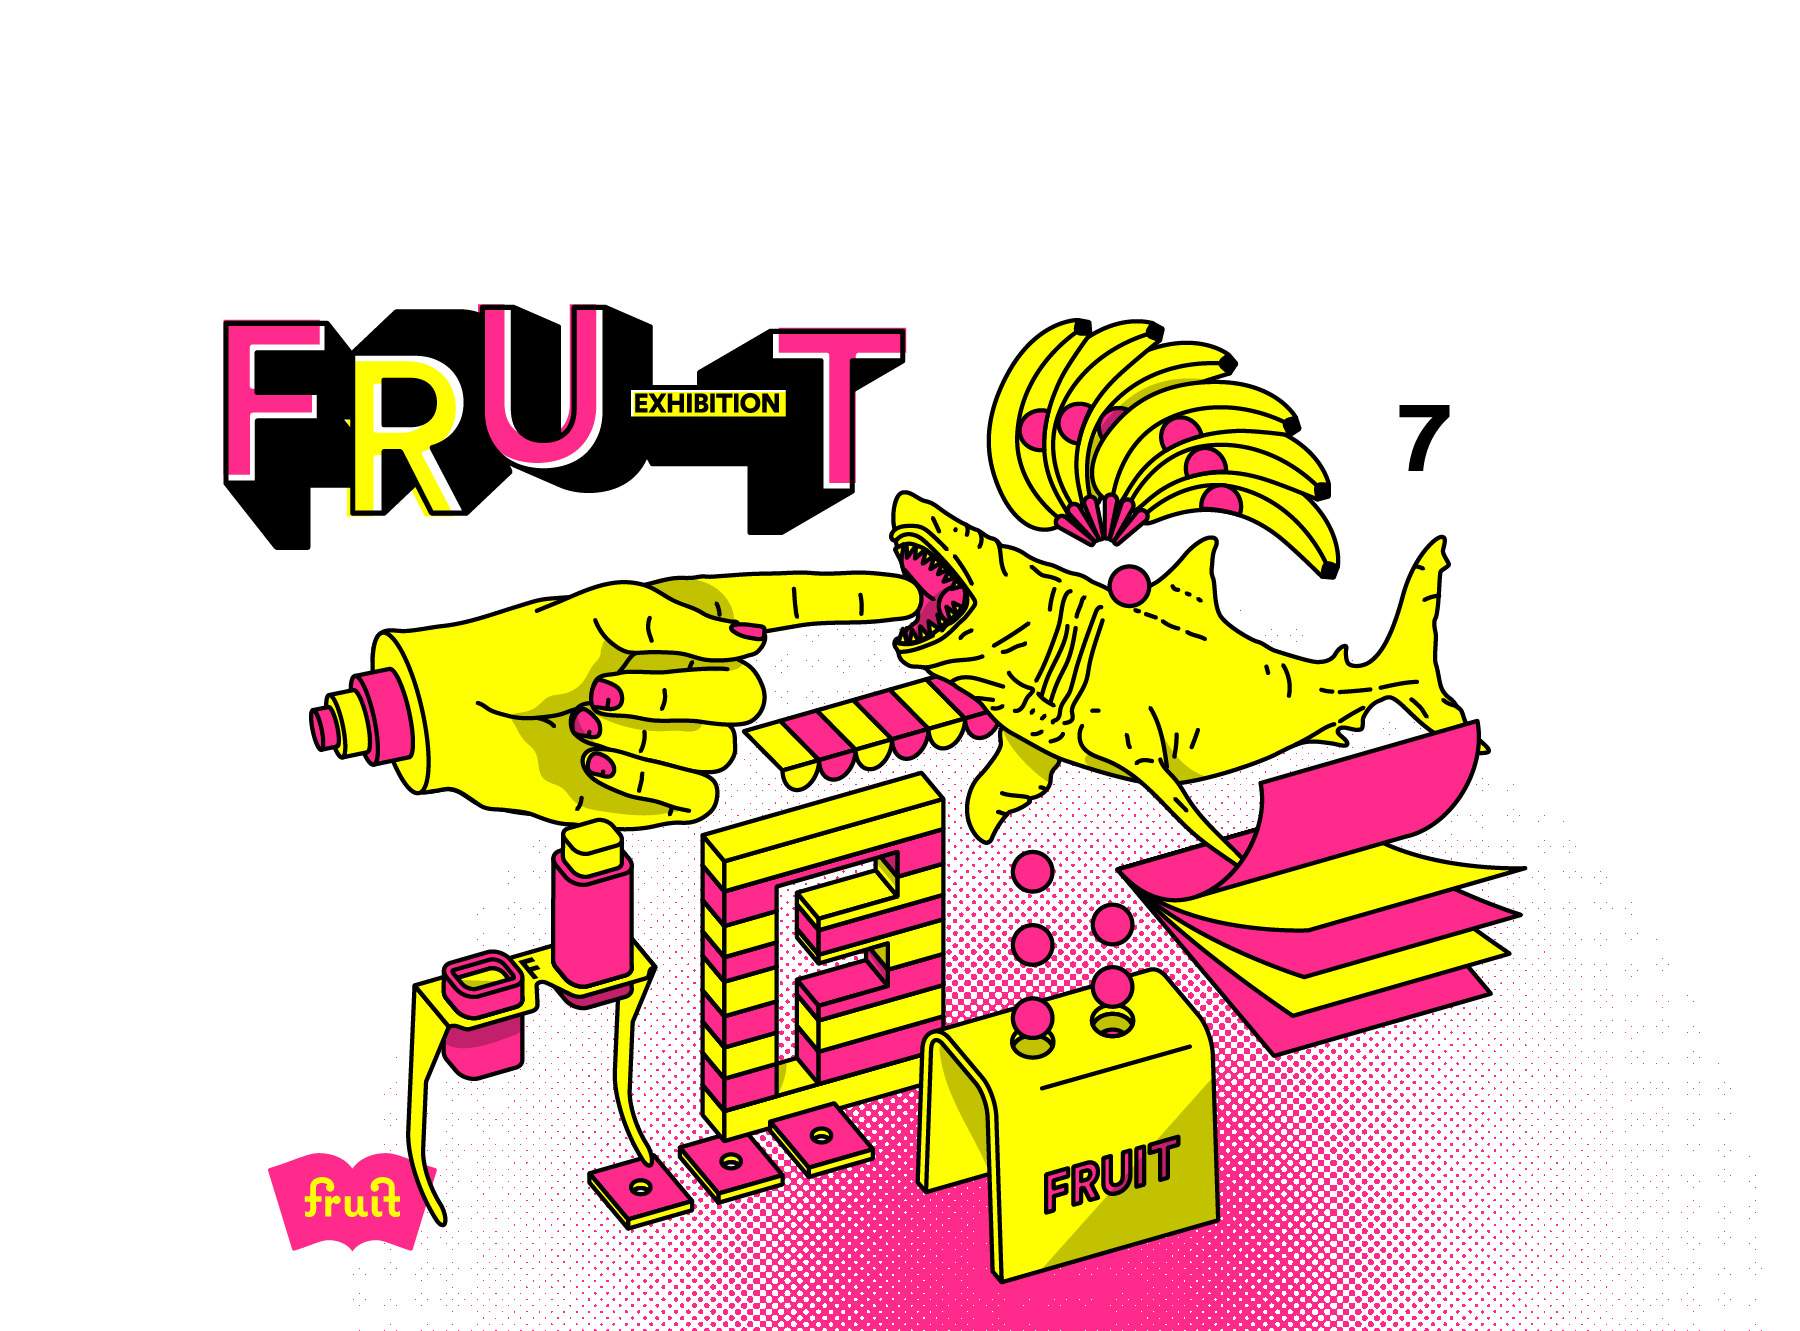 Bologna, from Feb. 1 to 3 the seventh edition of Fruit Exhibition, art publications fair